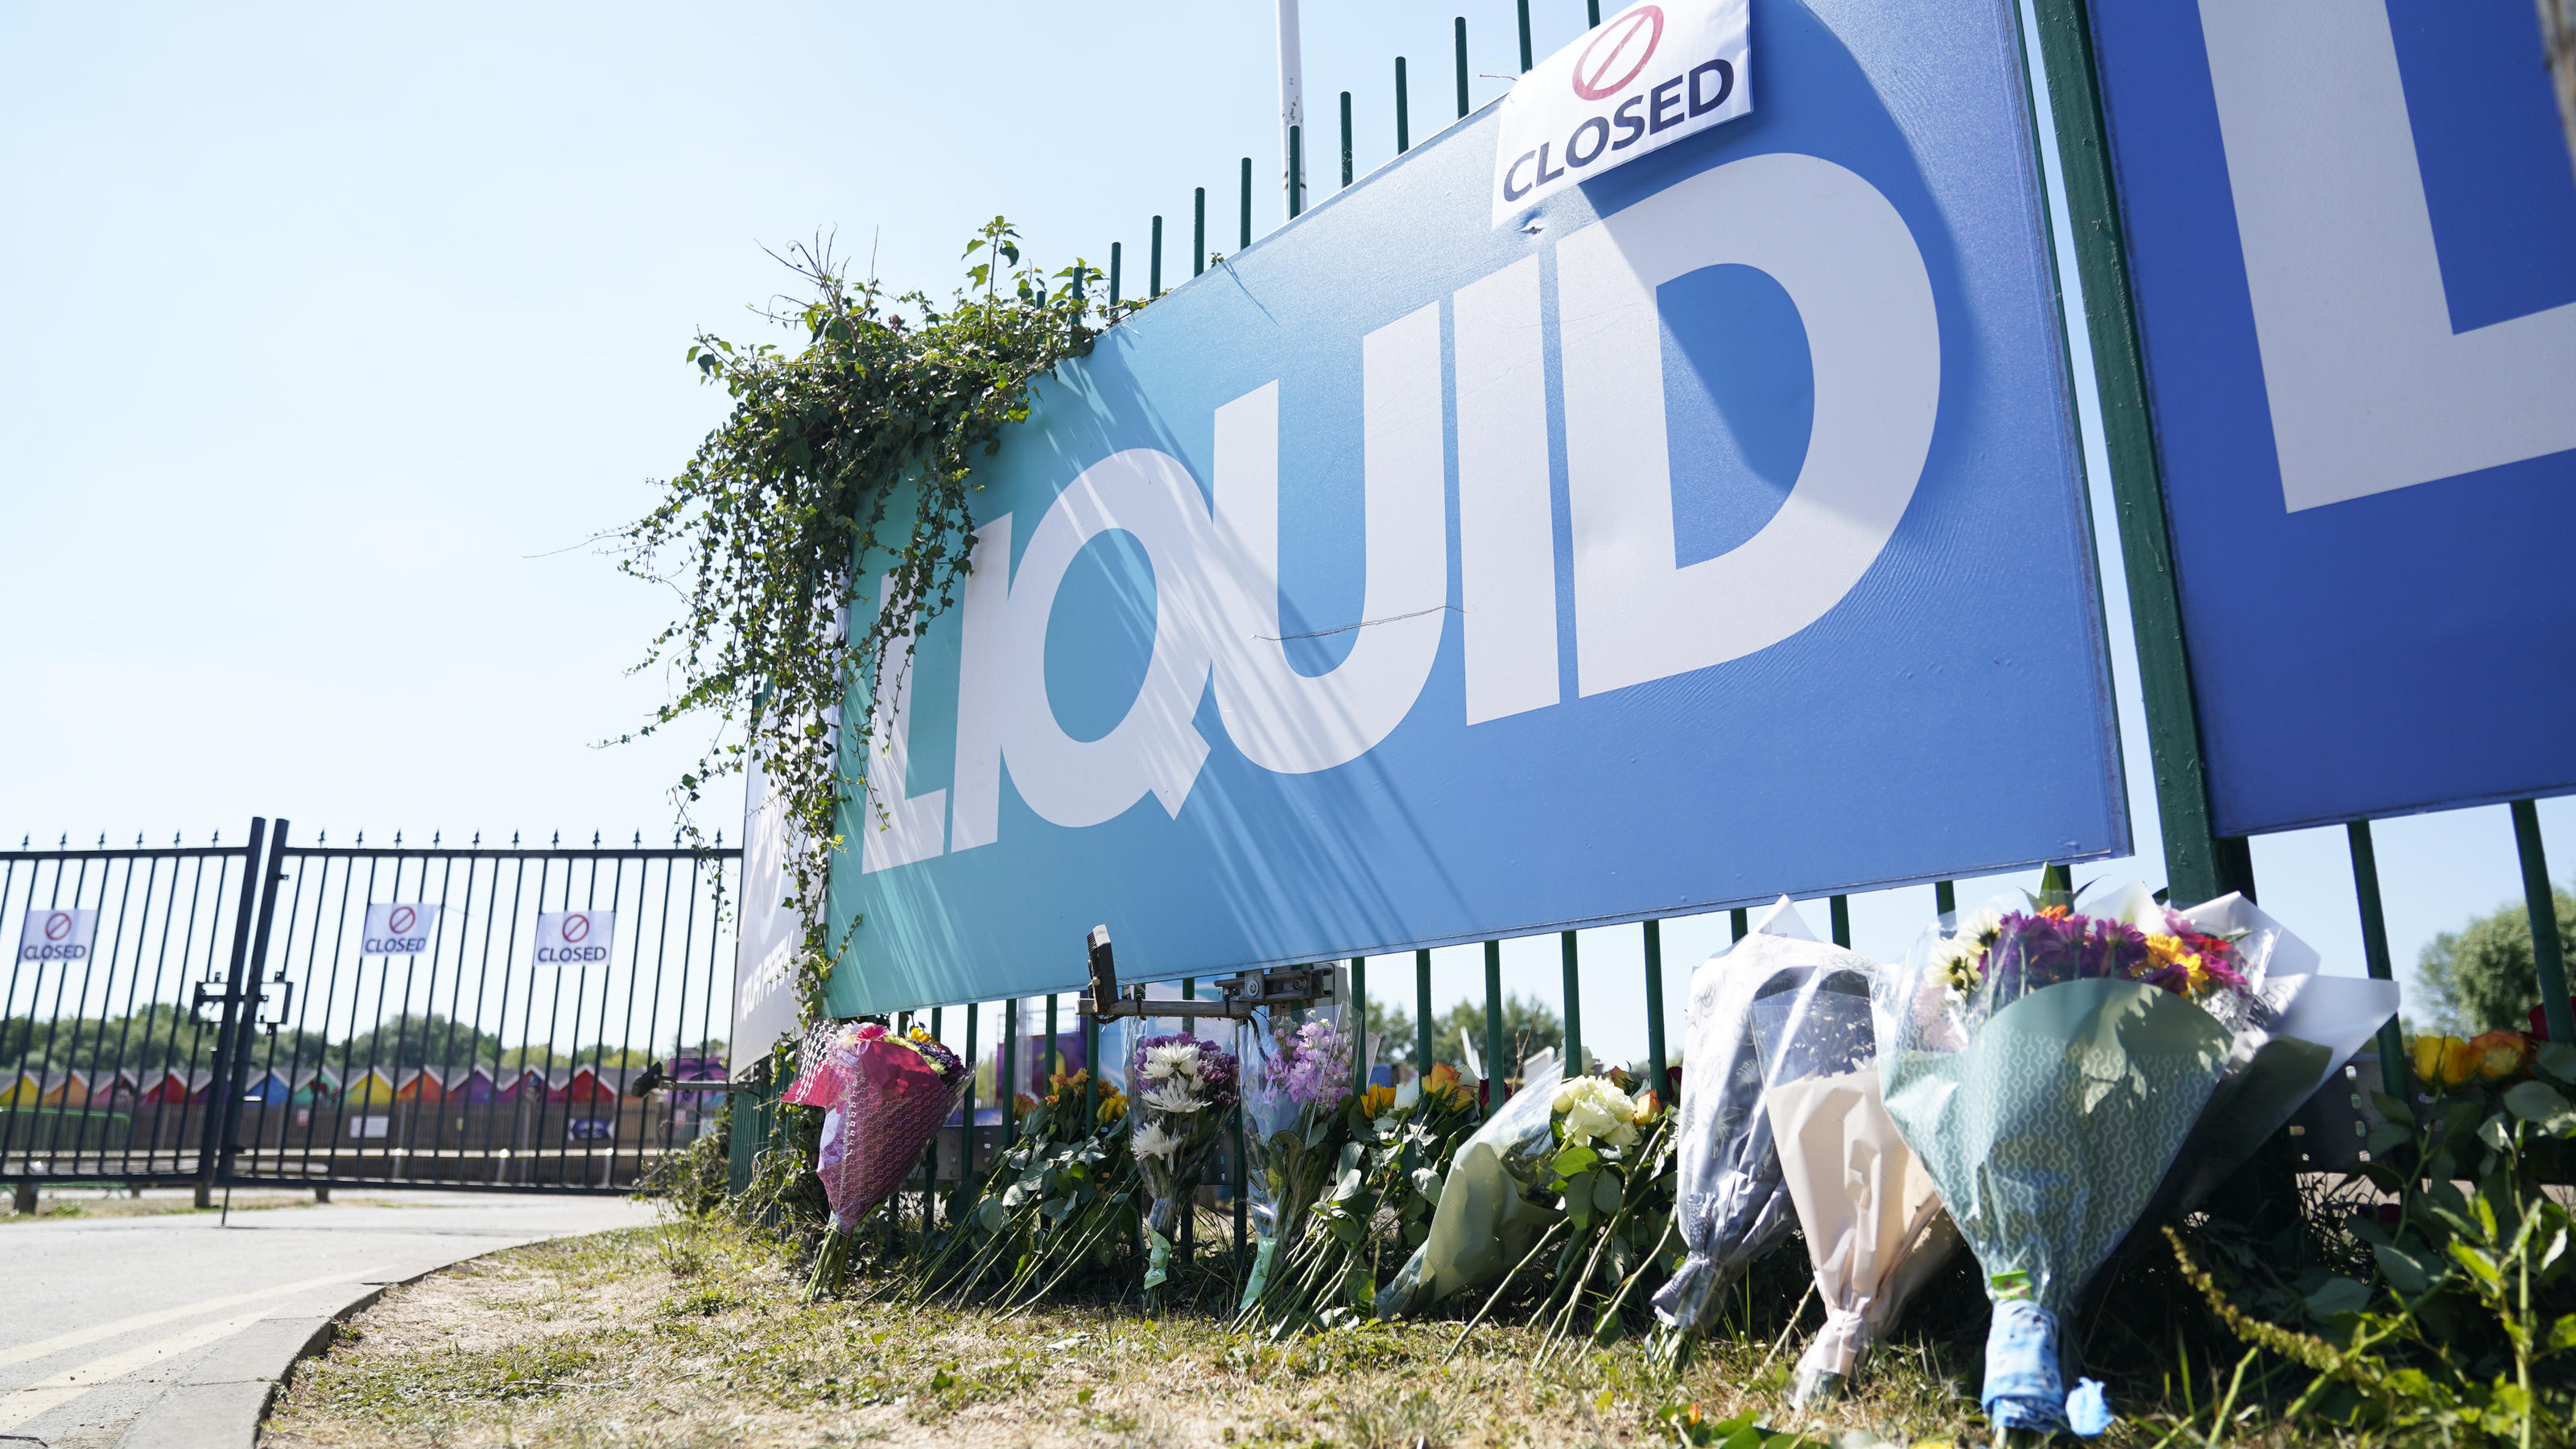 Liquid Leisure death. Flowers are left outside Liquid Leisure in Windsor, following the death of an 11-year-old girl. Emergency services were called at around 3.55pm on Saturday to reports of the child getting into difficulty at the water park near D